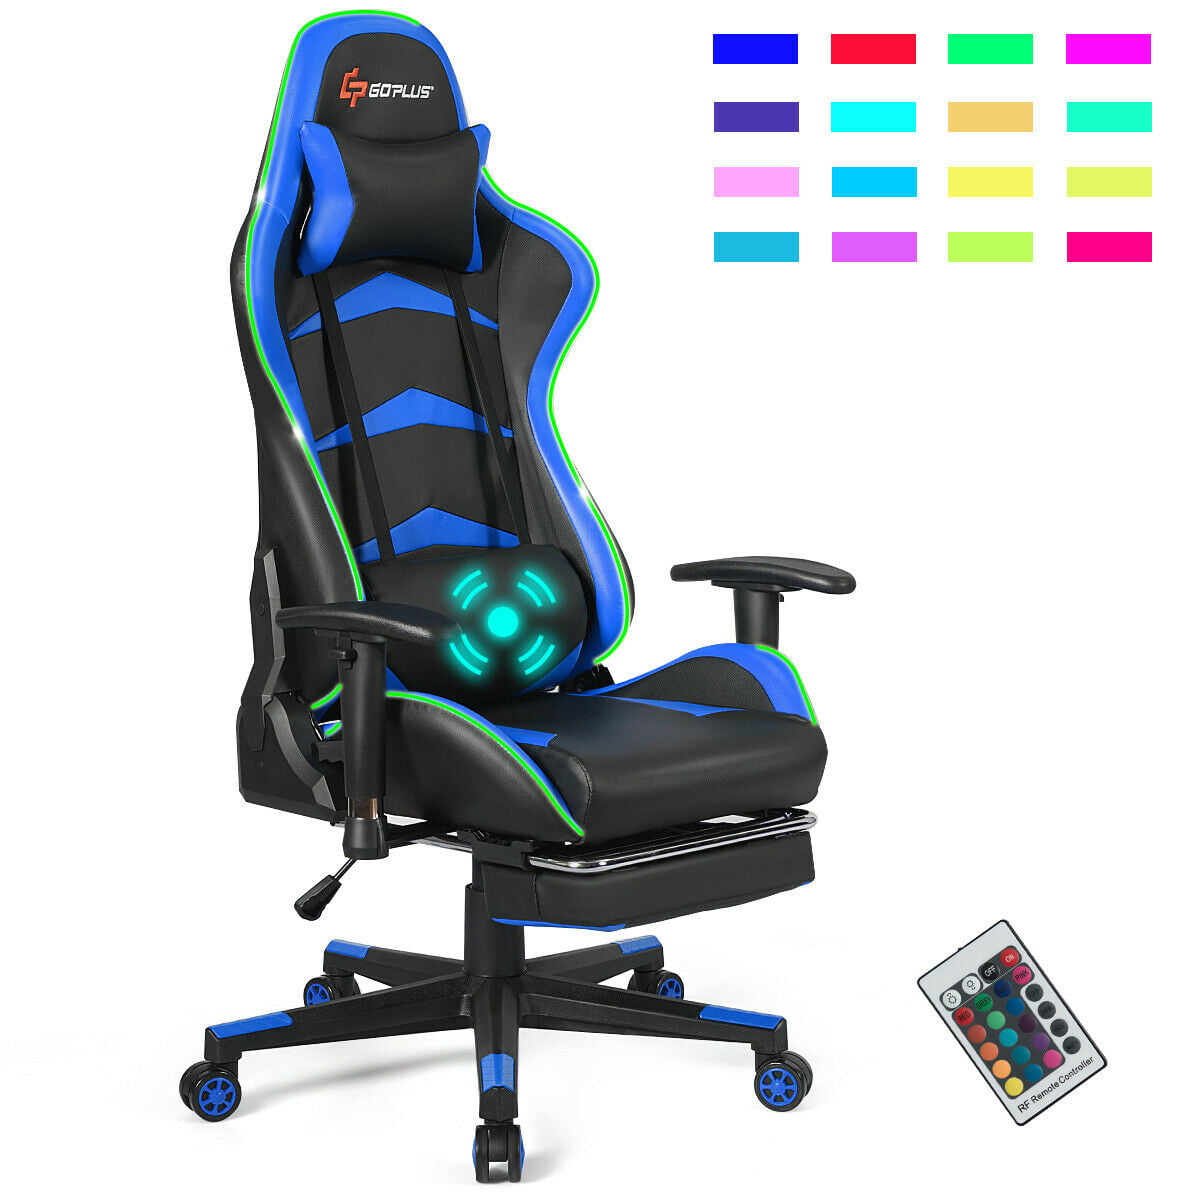 Goplus Massage LED Gaming Chair Reclining Racing Chair w/Lumbar Support